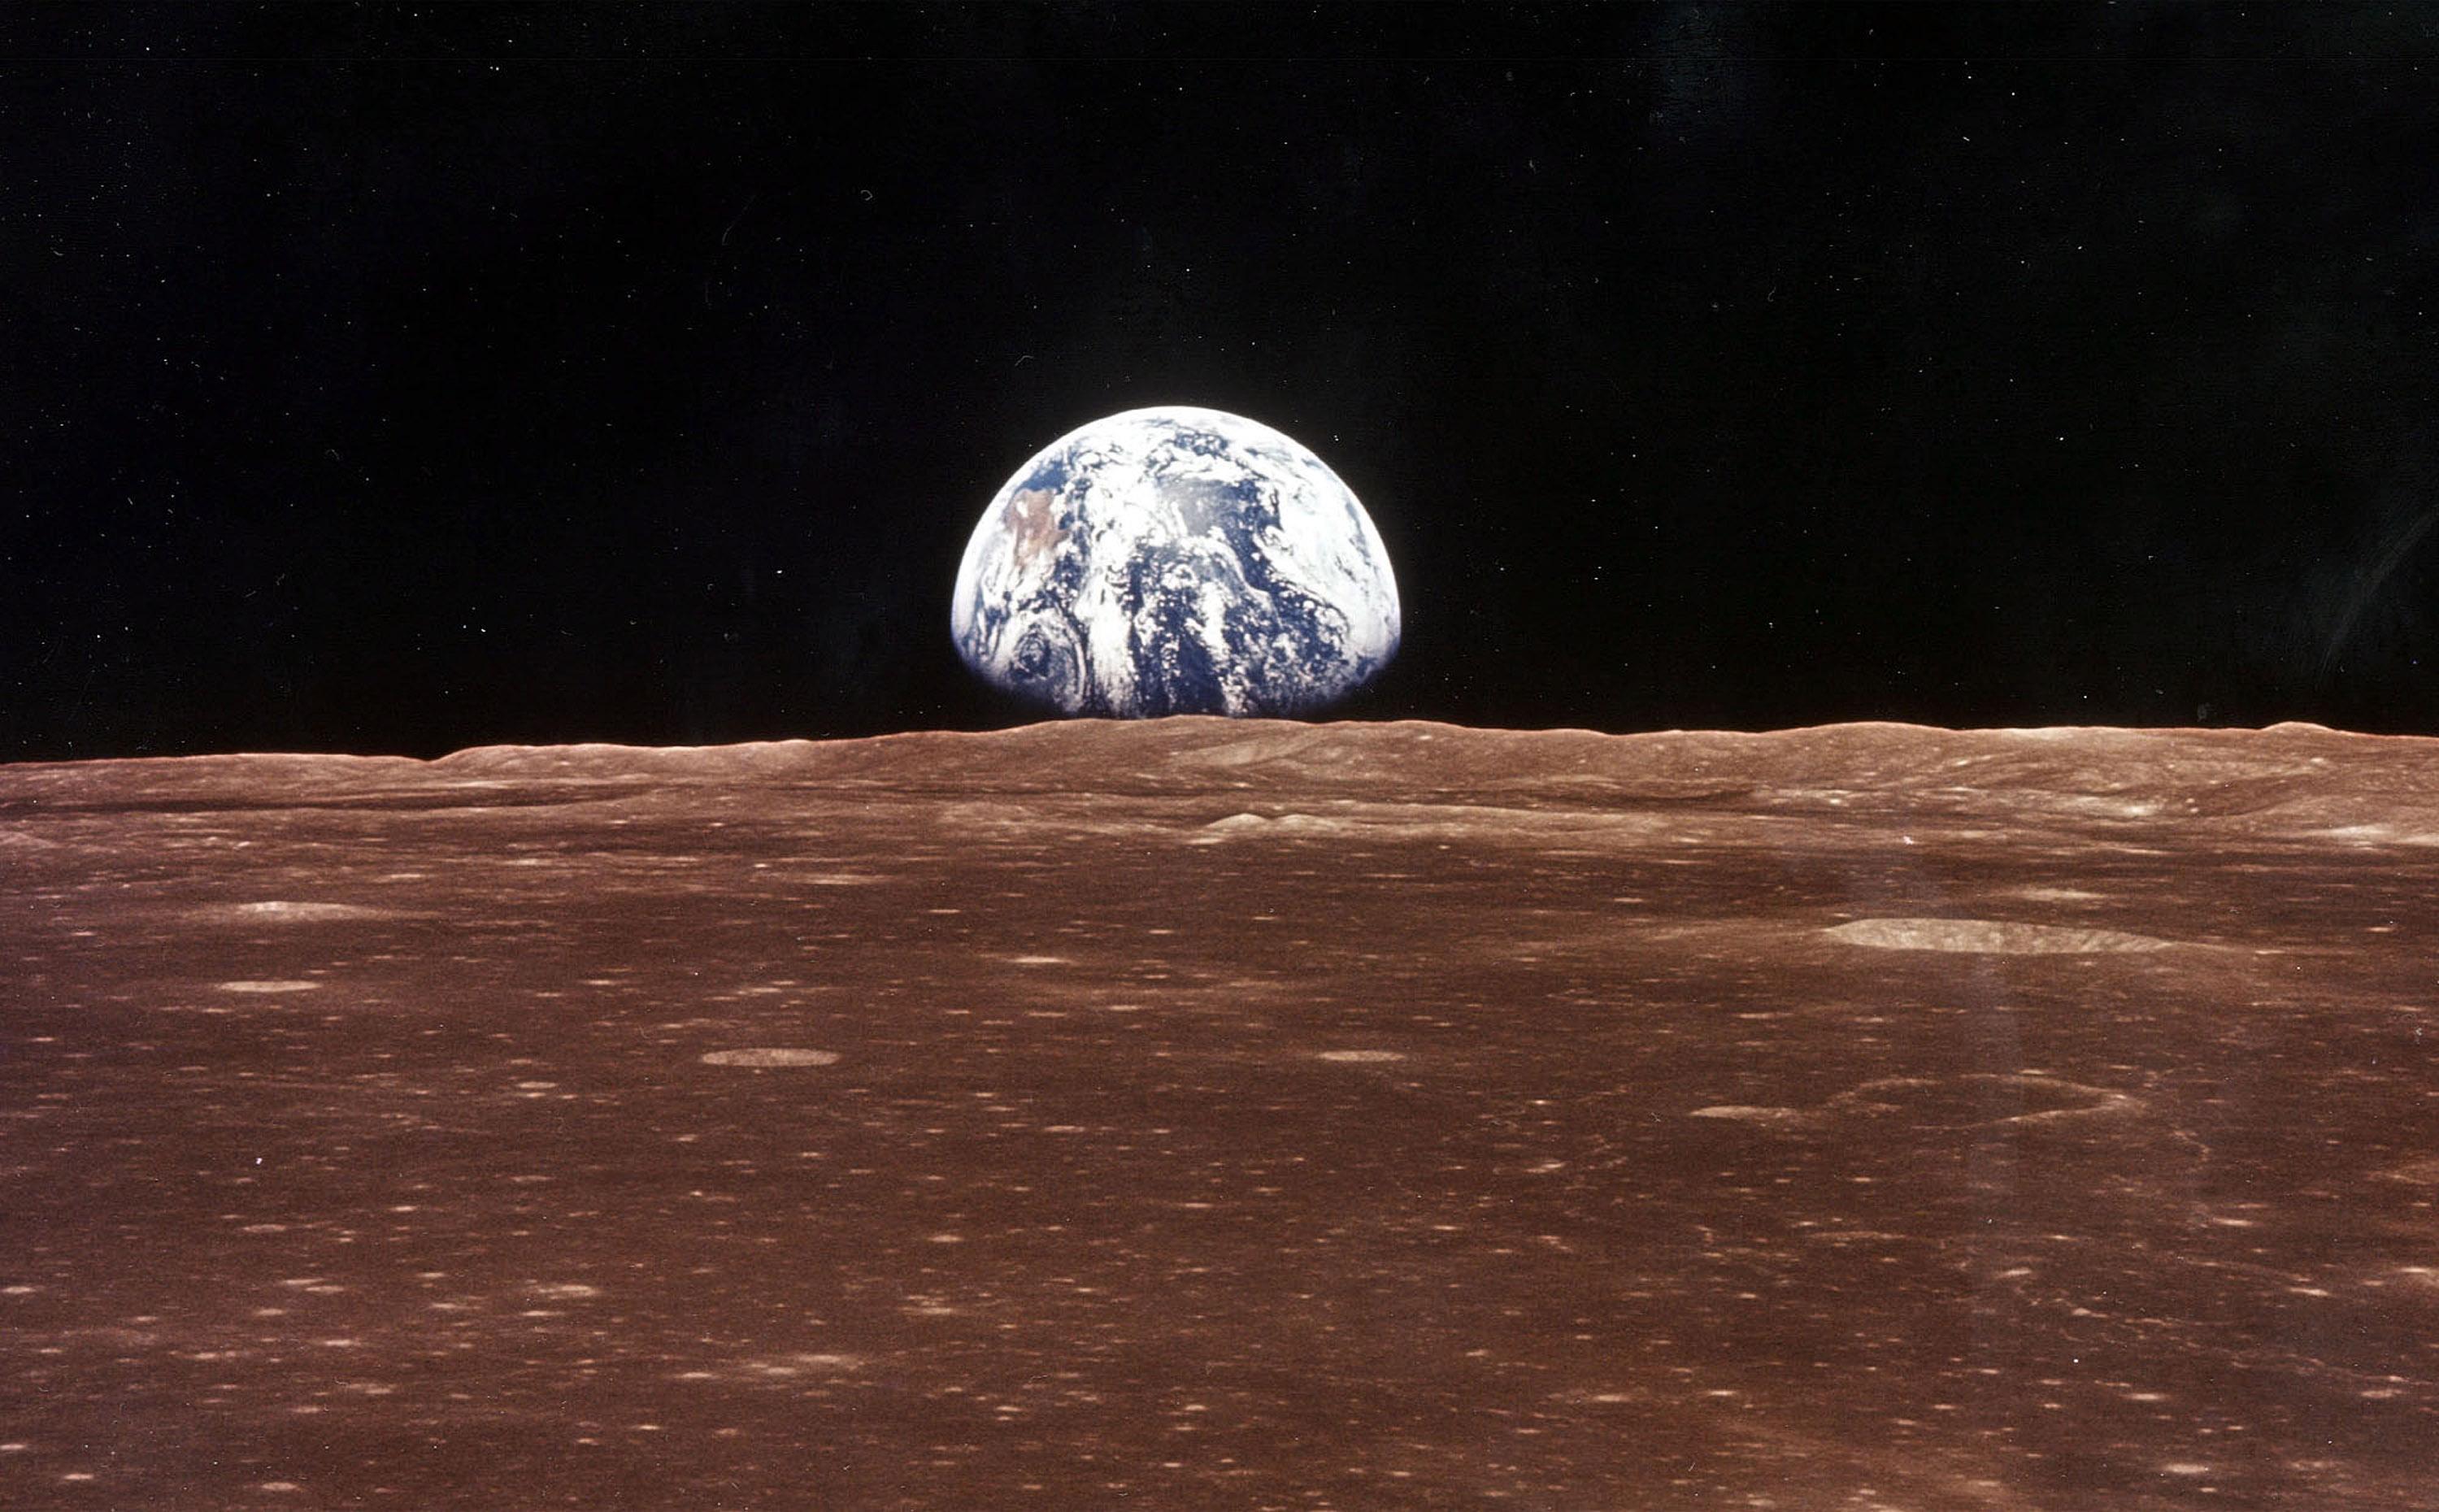 Earth as it is seen from the moon.